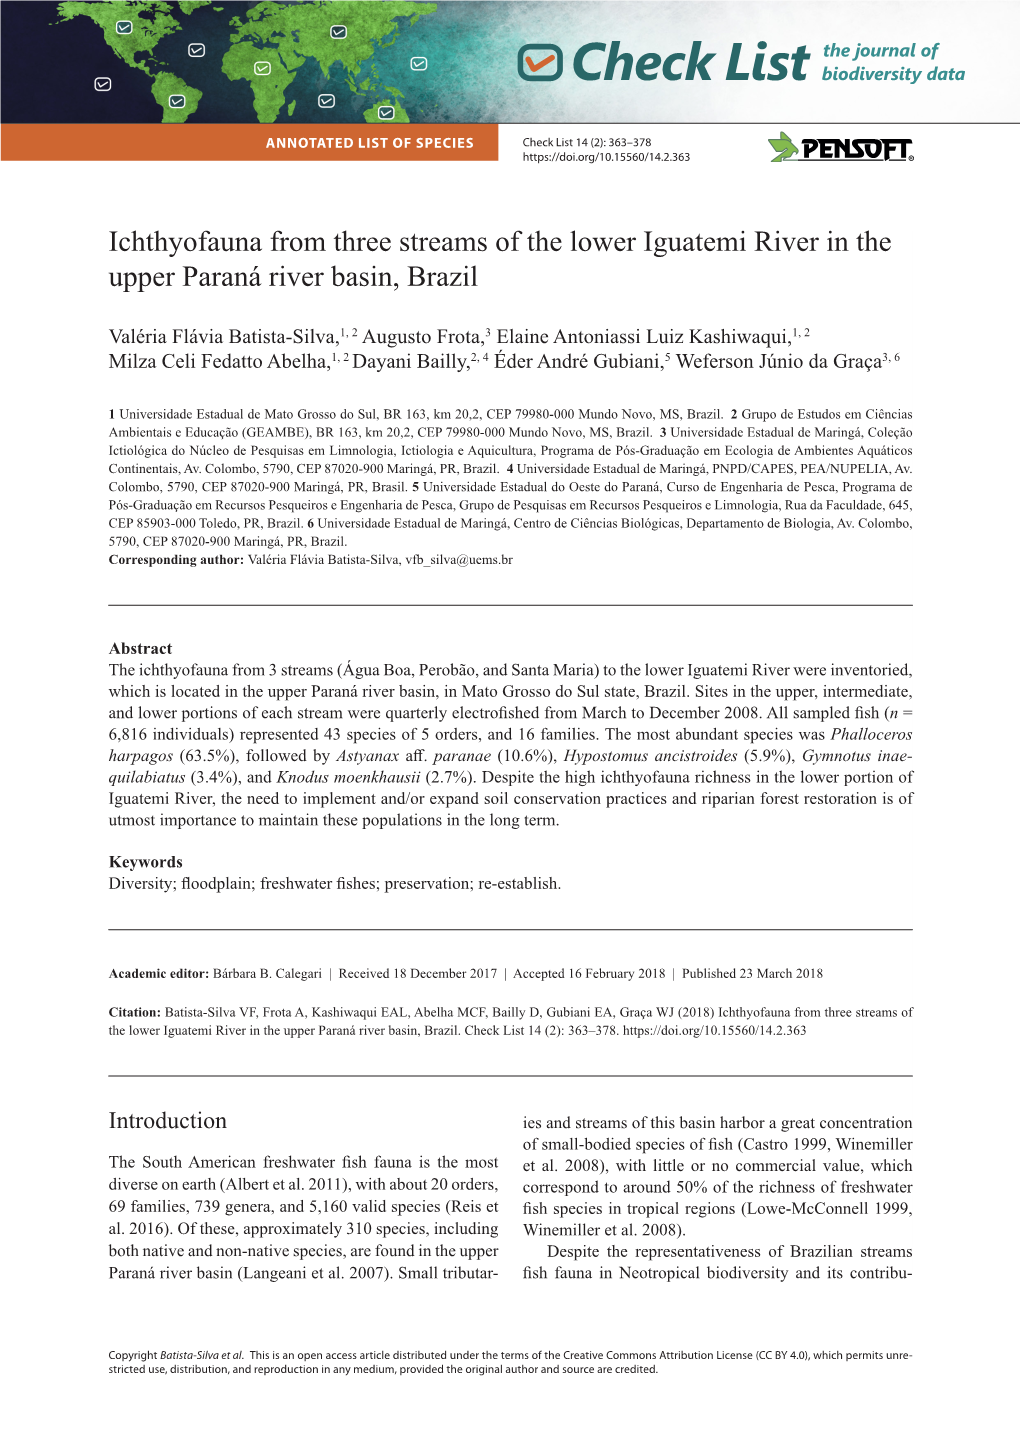 Ichthyofauna from Three Streams of the Lower Iguatemi River in the Upper Paraná River Basin, Brazil